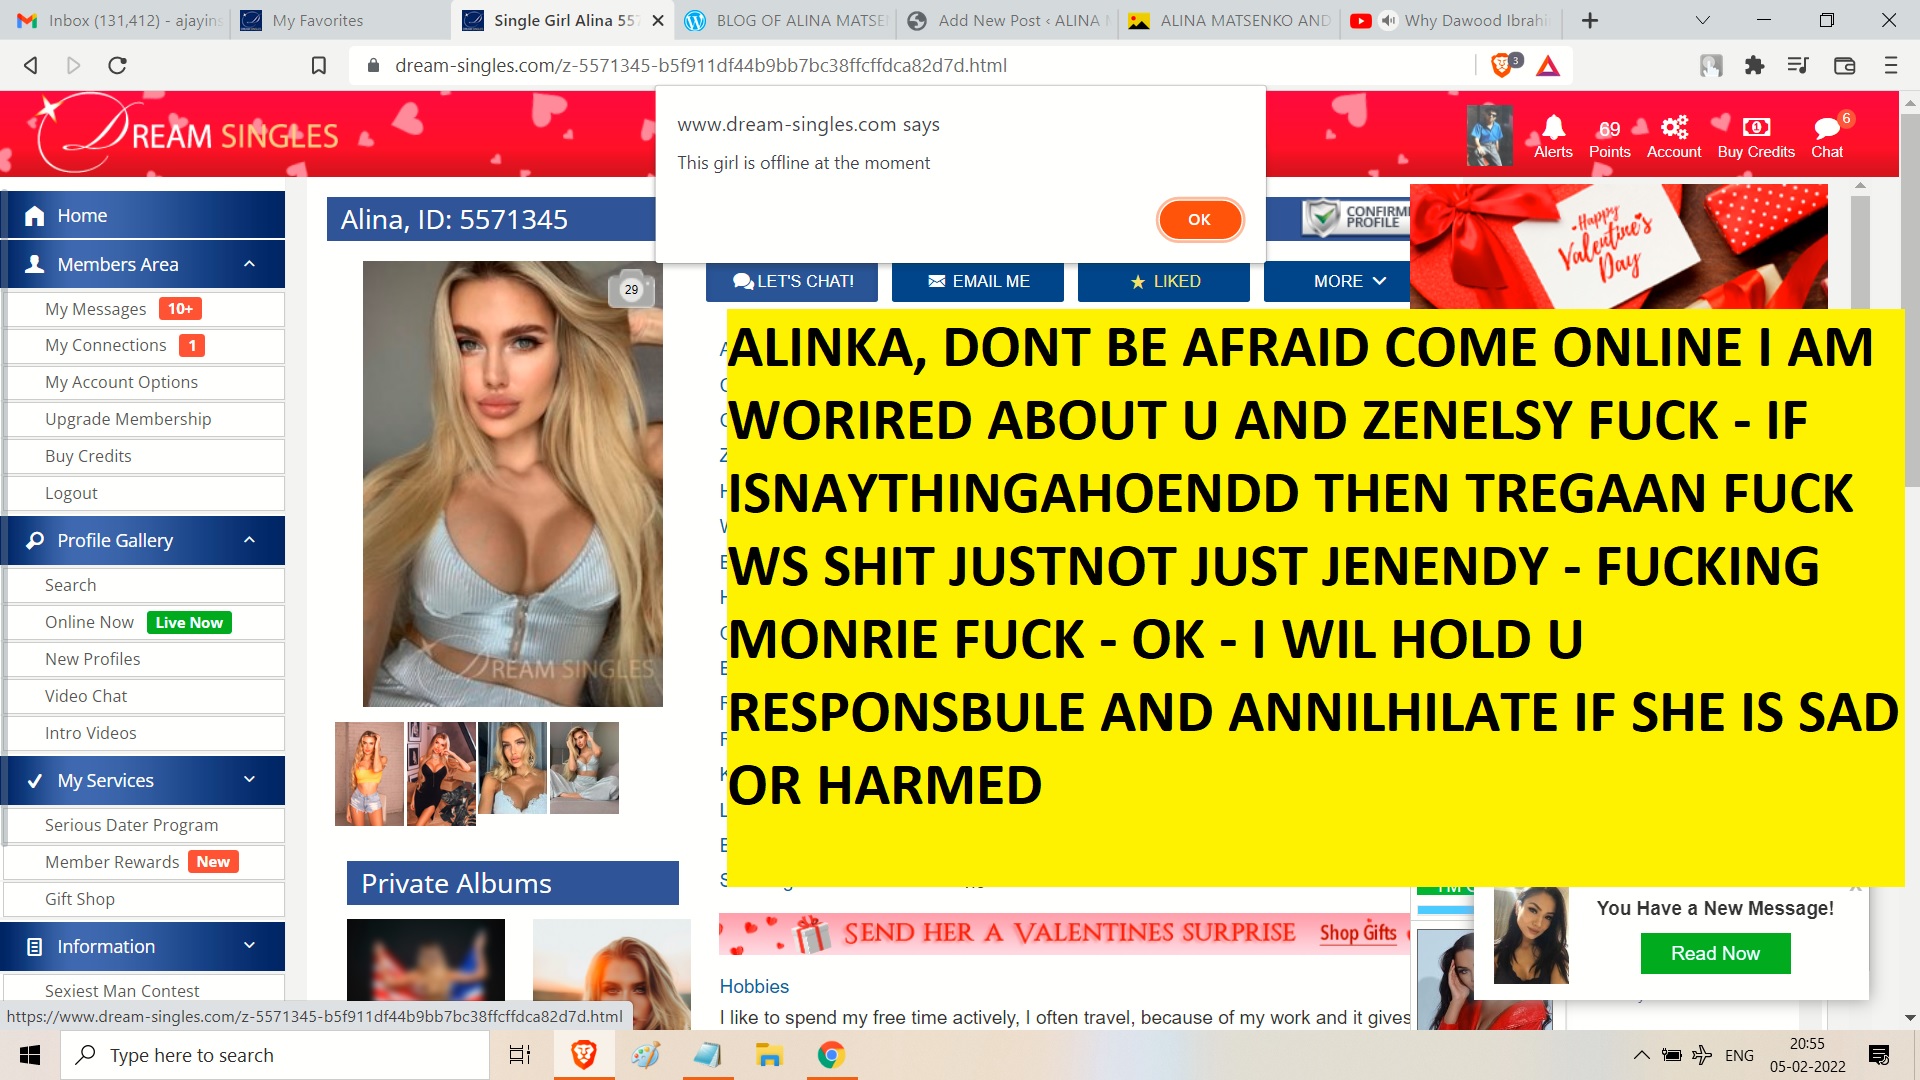 ALINKA, DONT BE AFRAID COME ONLINE I AM WORIRED ABOUT U AND ZENELSY FUCK - IF ISNAYTHINGAHOENDD THEN TREGAAN FUCK WS SHIT JUSTNOT JUST JENENDY